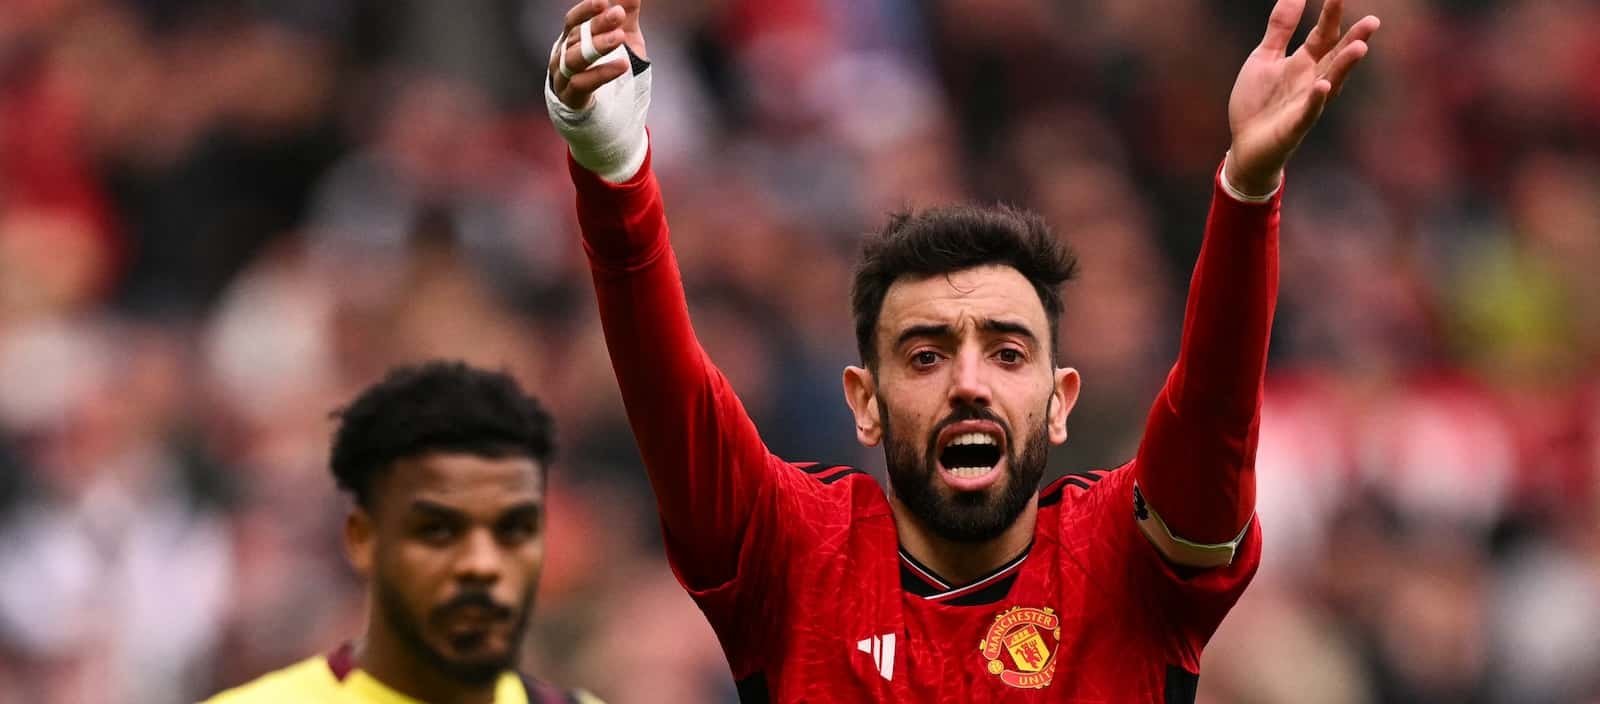 Bruno Fernandes shines in another stellar display for Man United despite disappointing draw vs. Burnley – Man United News And Transfer News